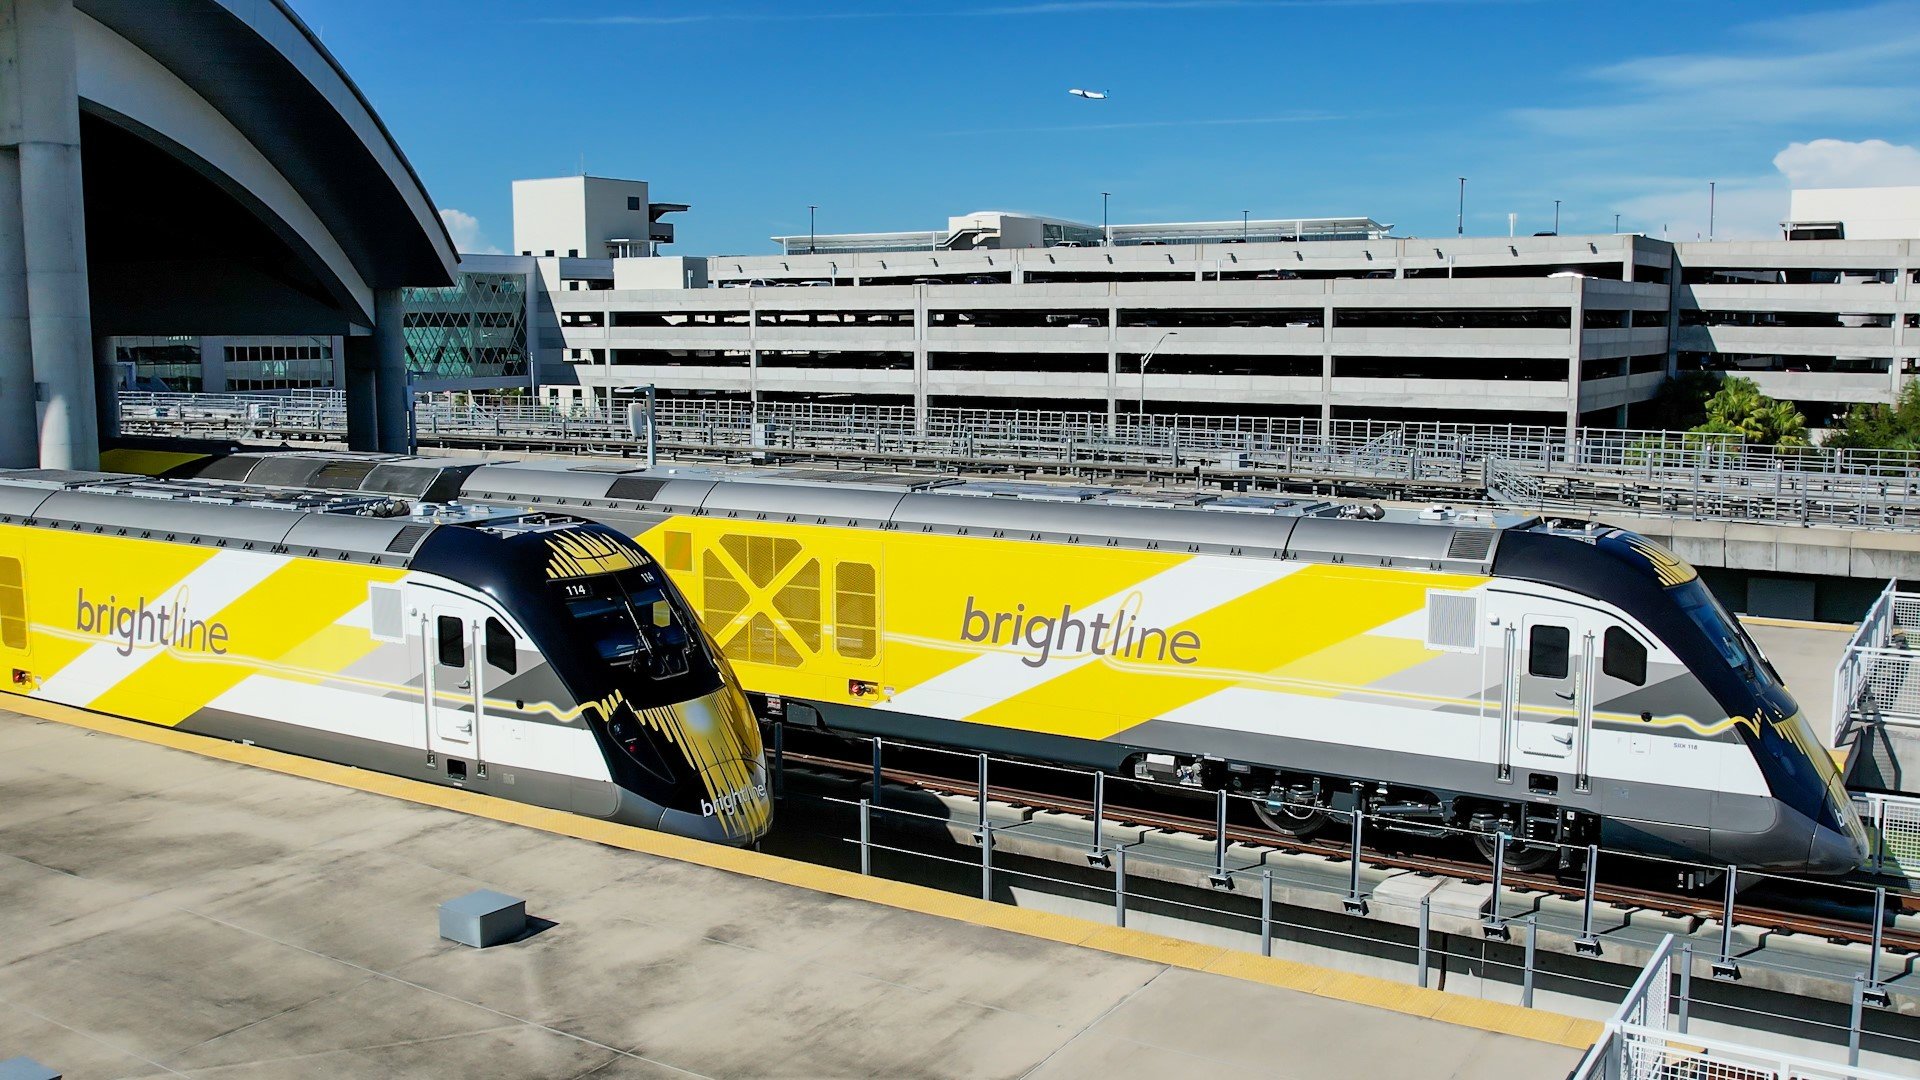 two brightline trains coming out of the station